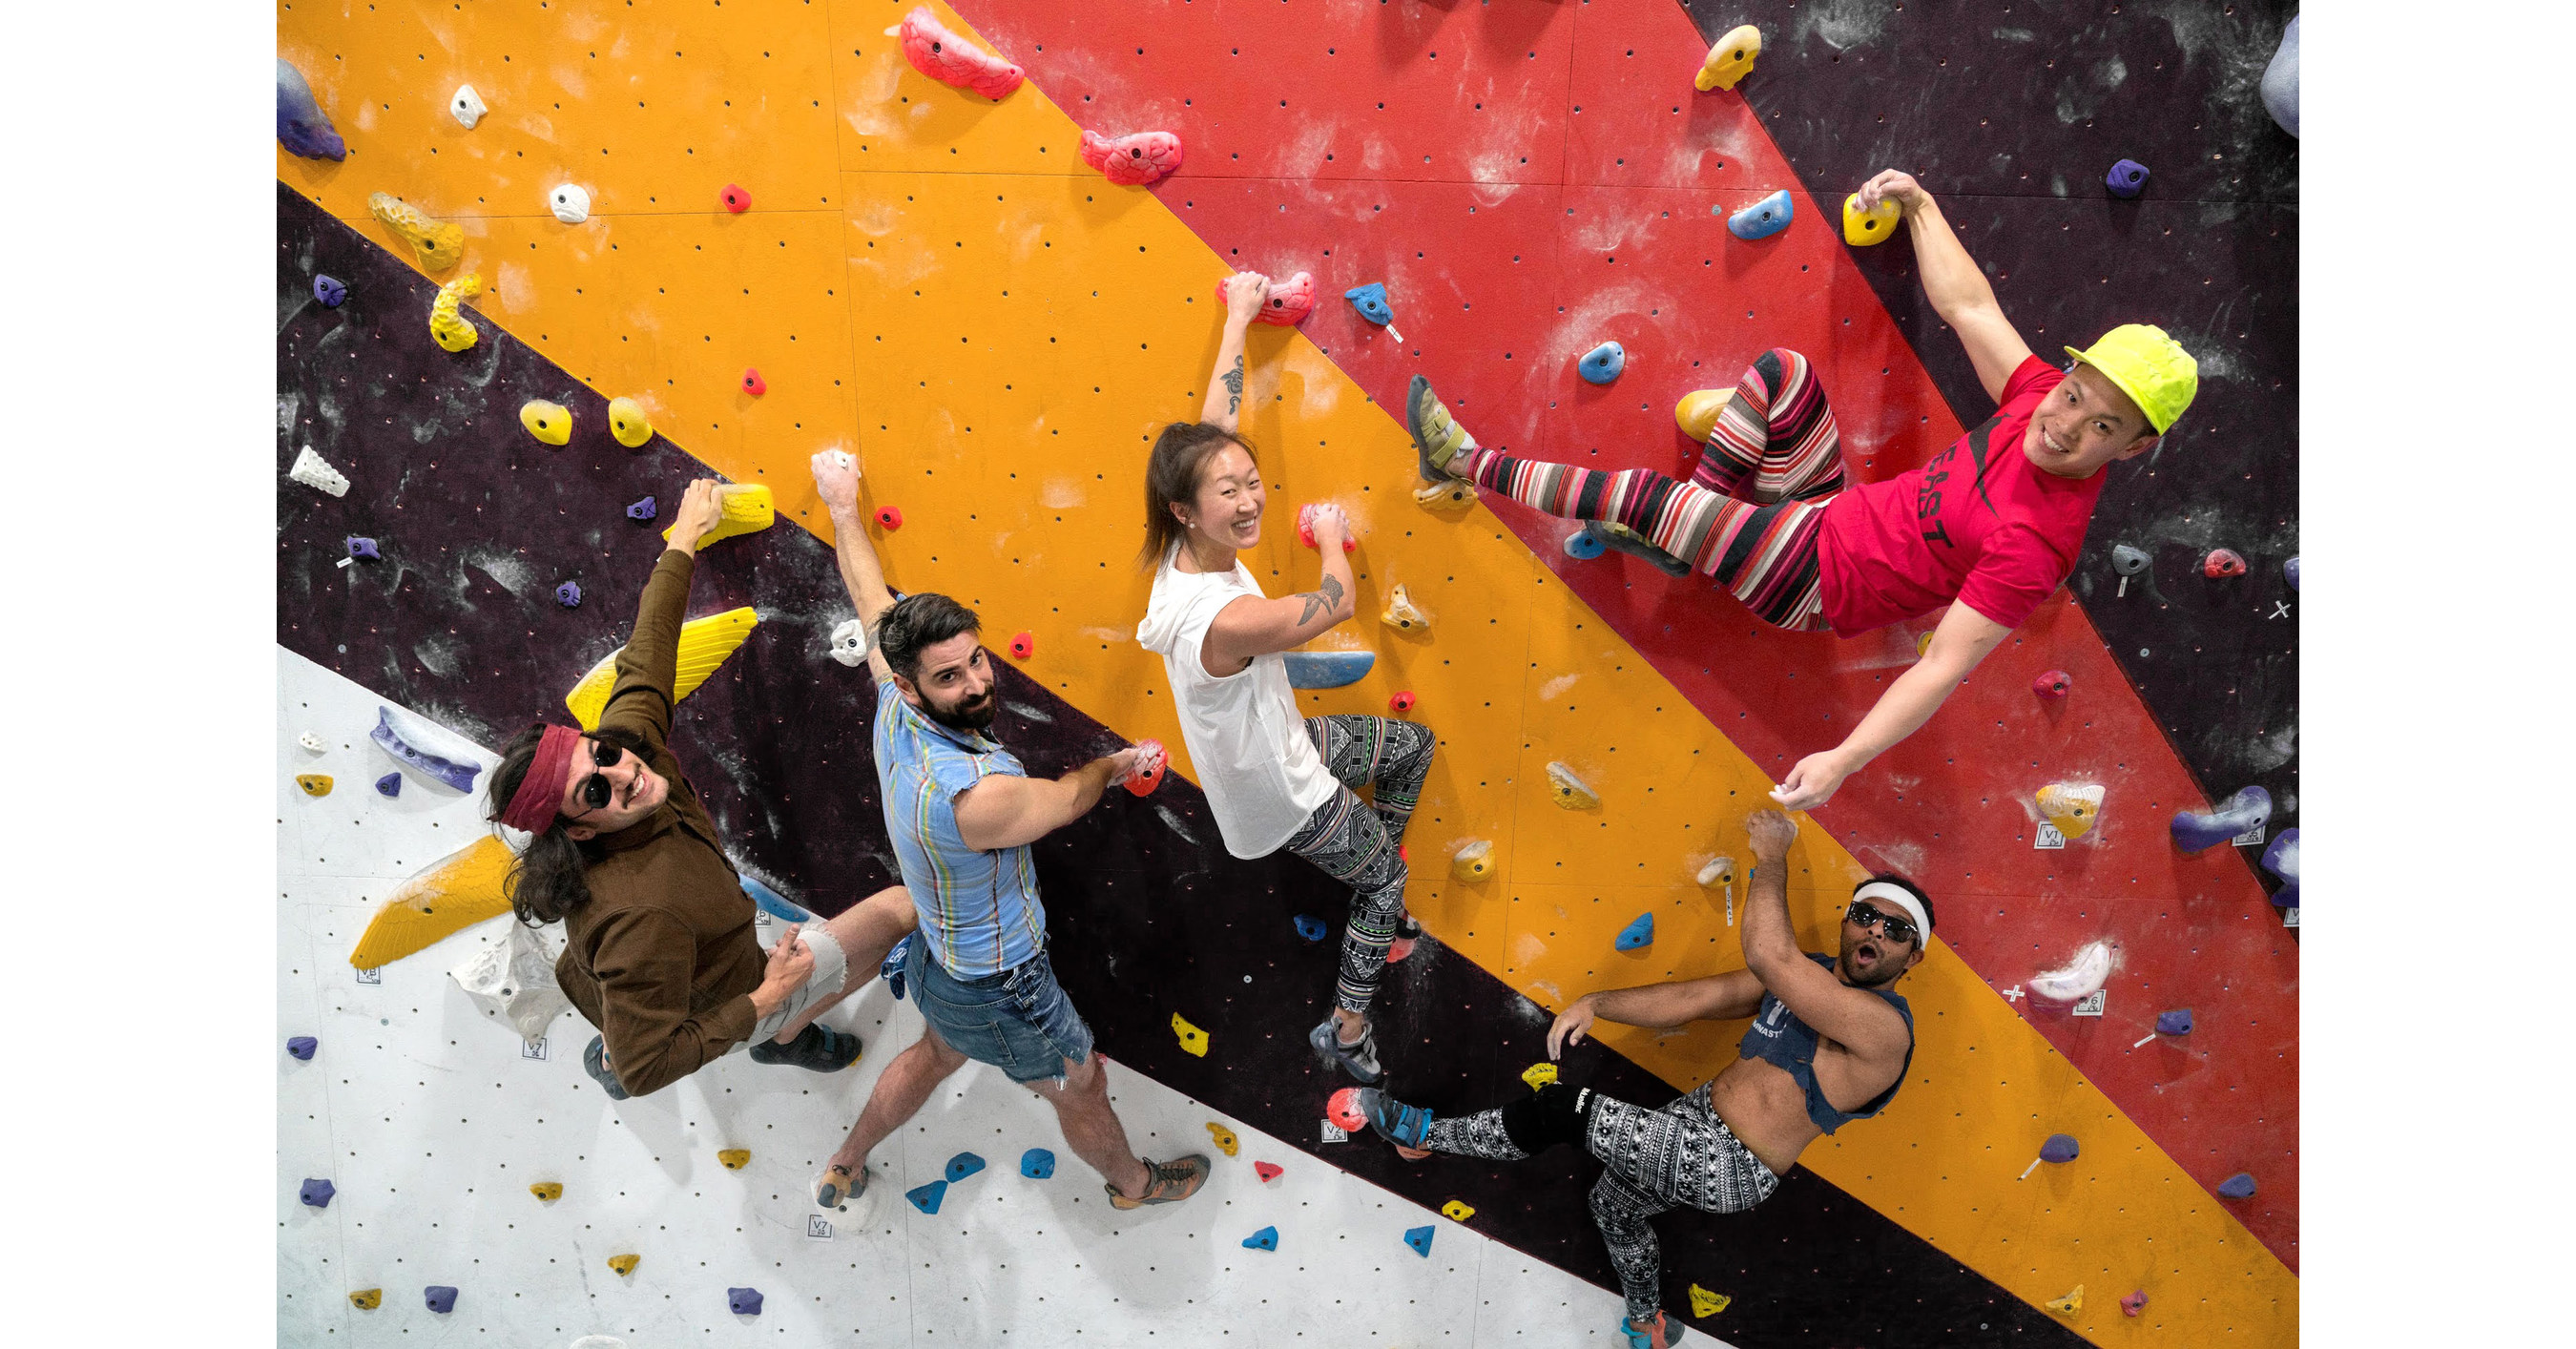 PITTSBURGH WELCOMES FA CLIMBING & FITNESS TO STATION SQUARE